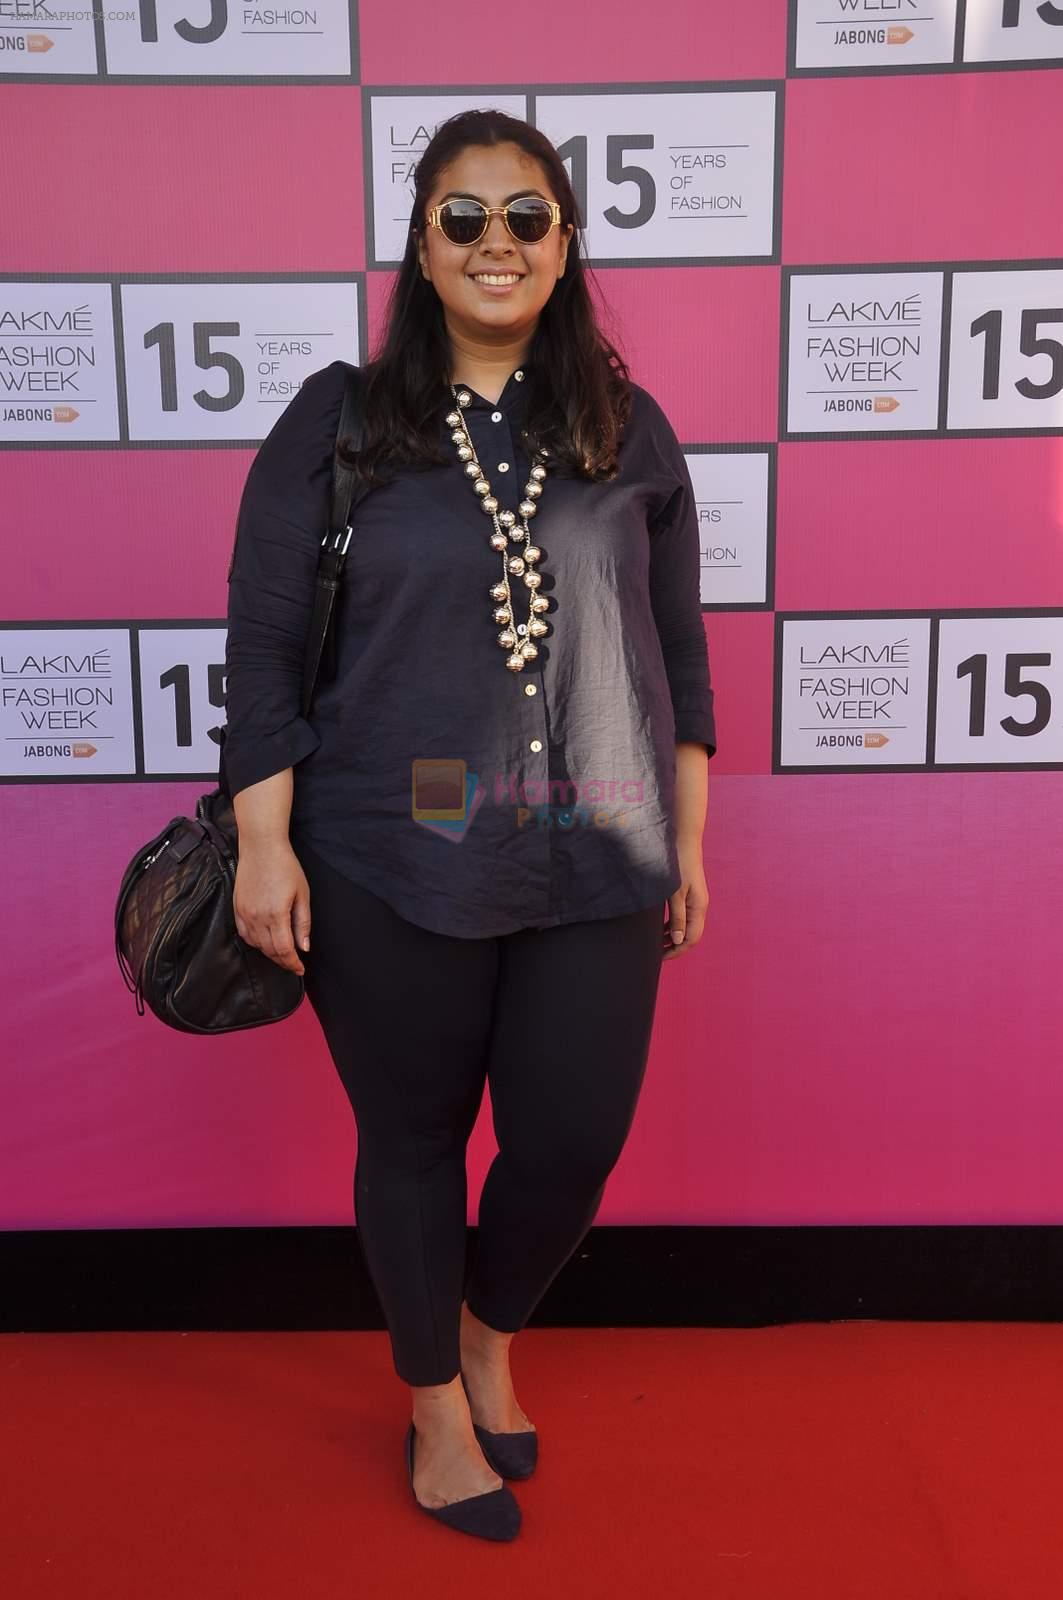 at Lakme Fashion Week preview in Palladium on 3rd March 2015